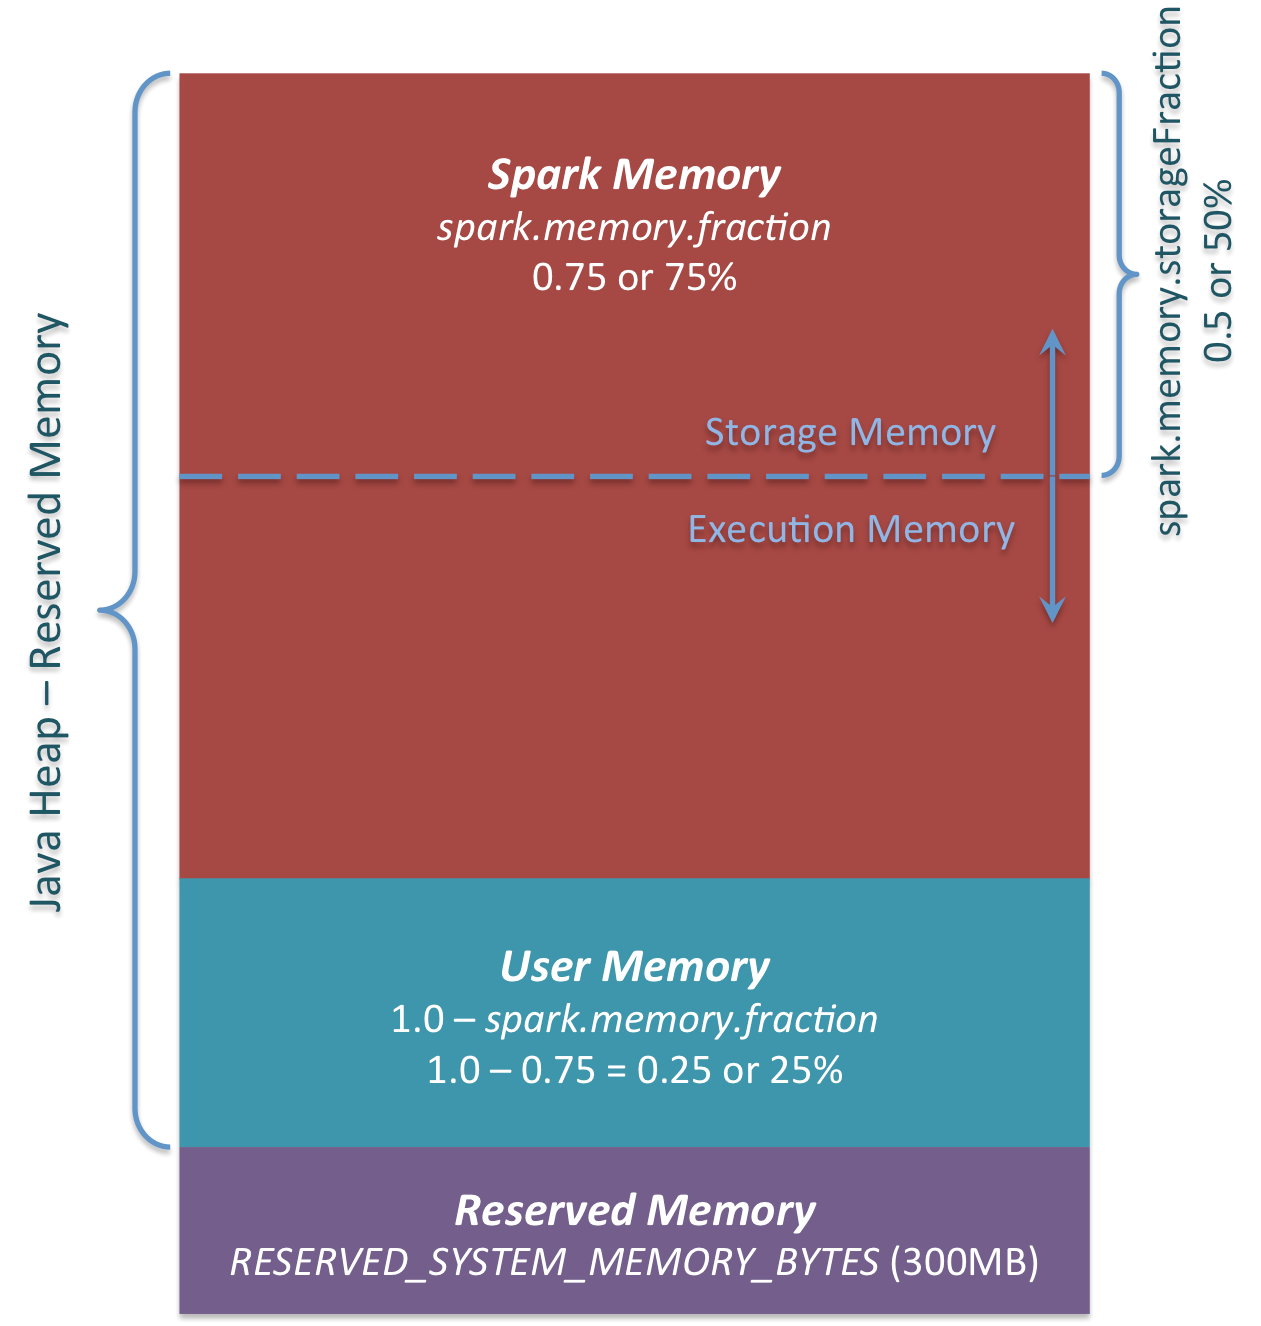 Spark Memory Management 1.6.0+<br>
Apache Spark Unified Memory Manager introduced in v1.6.0+